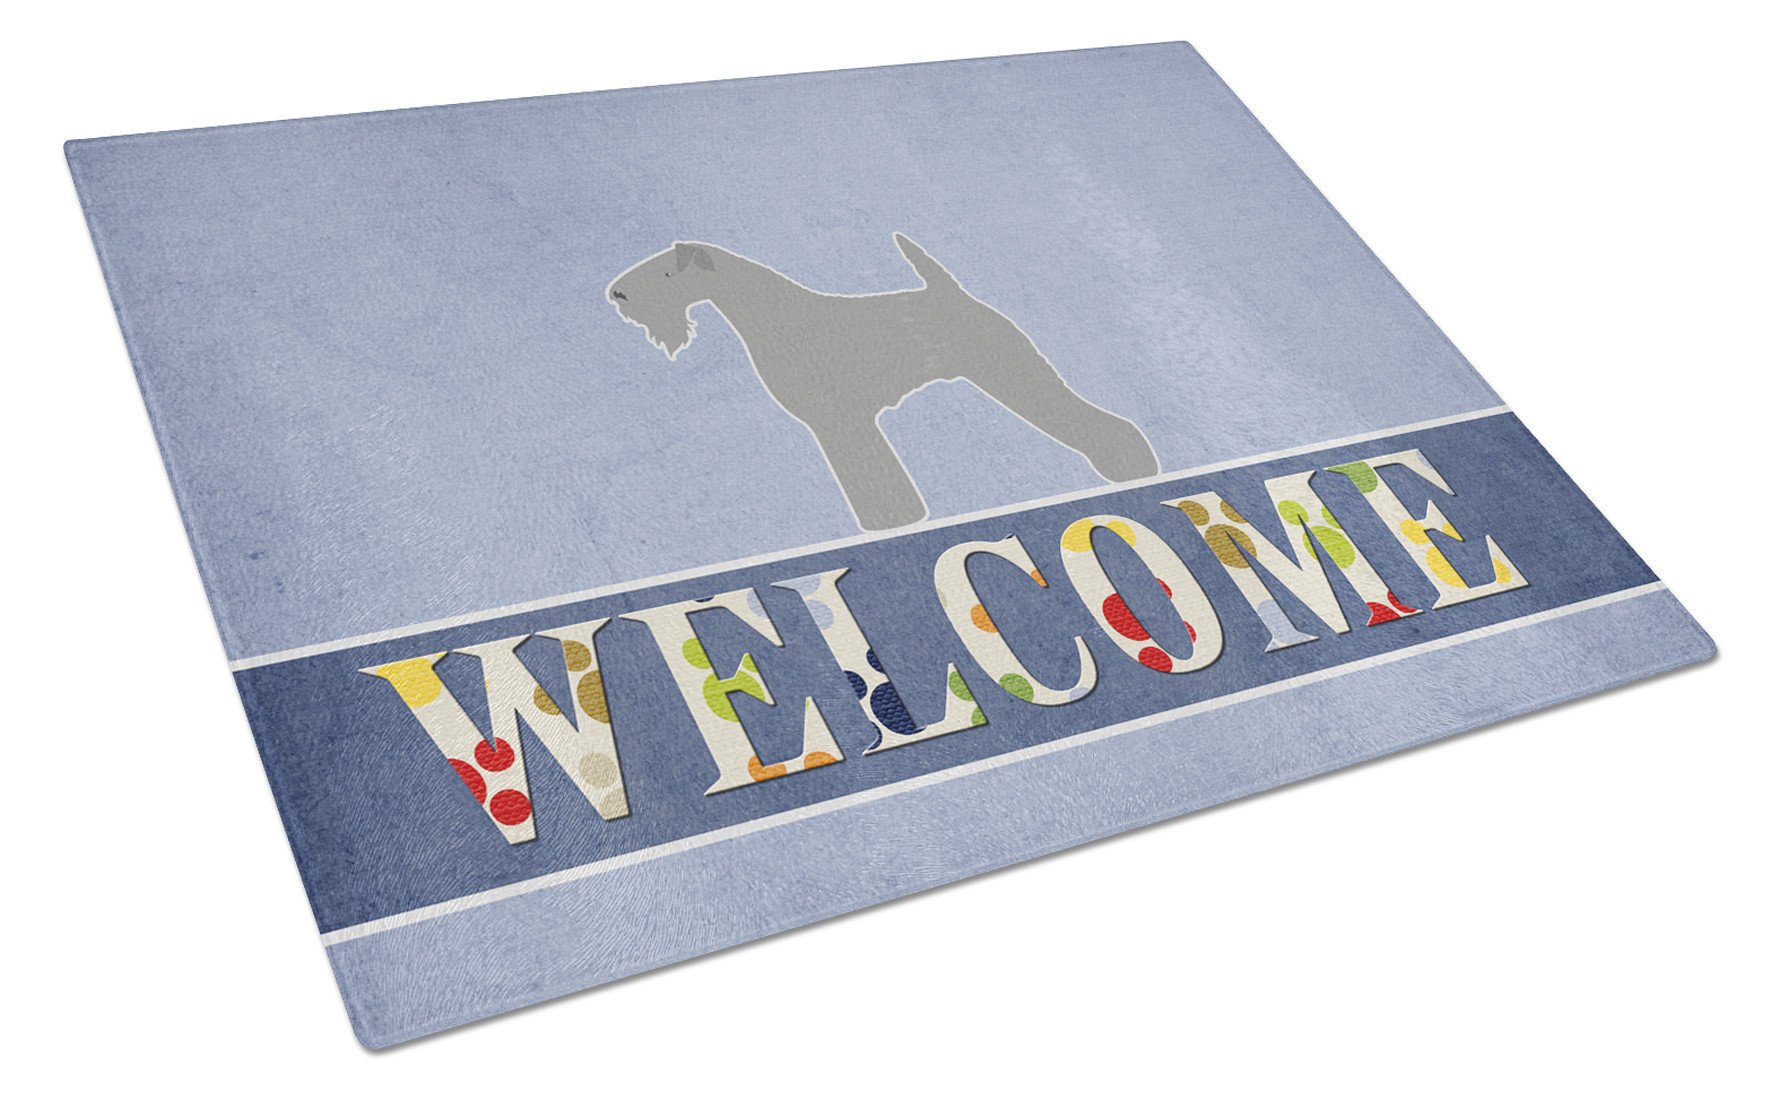 Kerry Blue Terrier Welcome Glass Cutting Board Large BB5496LCB by Caroline's Treasures